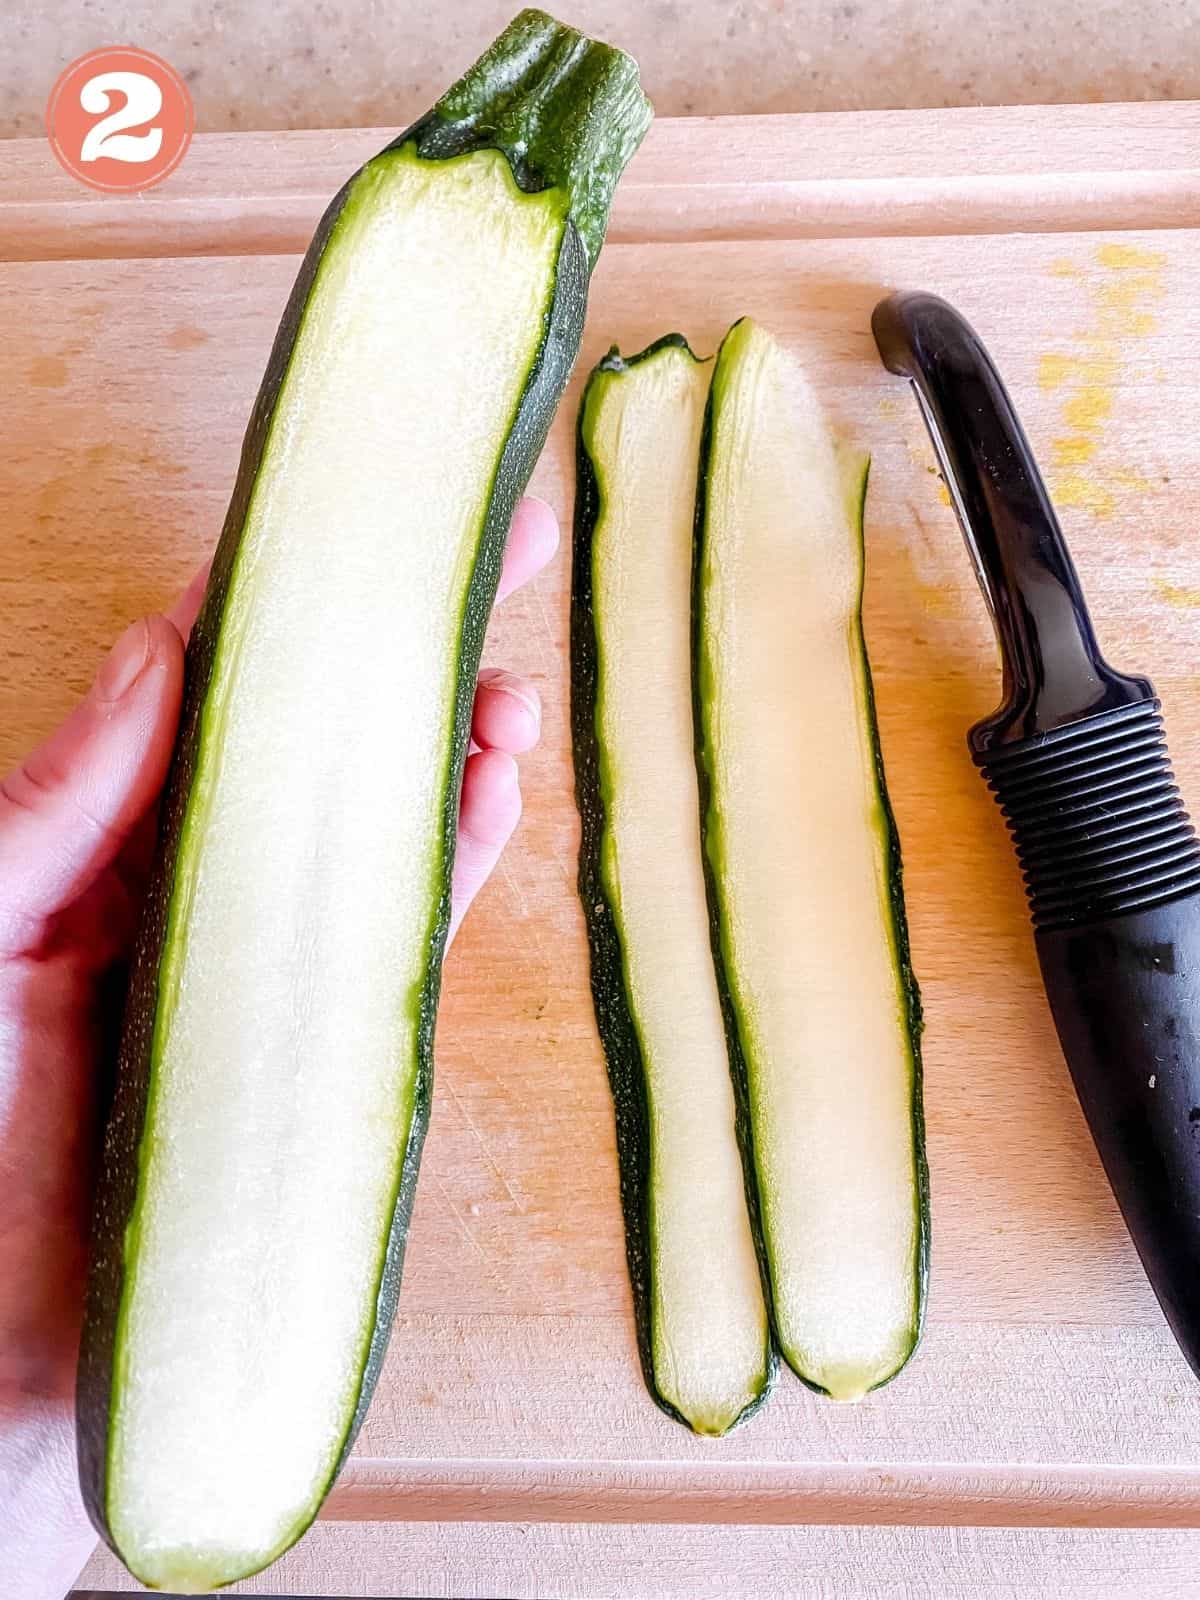 peeled zucchini and someone holding a zucchini above a wooden chopping board labelled number two.